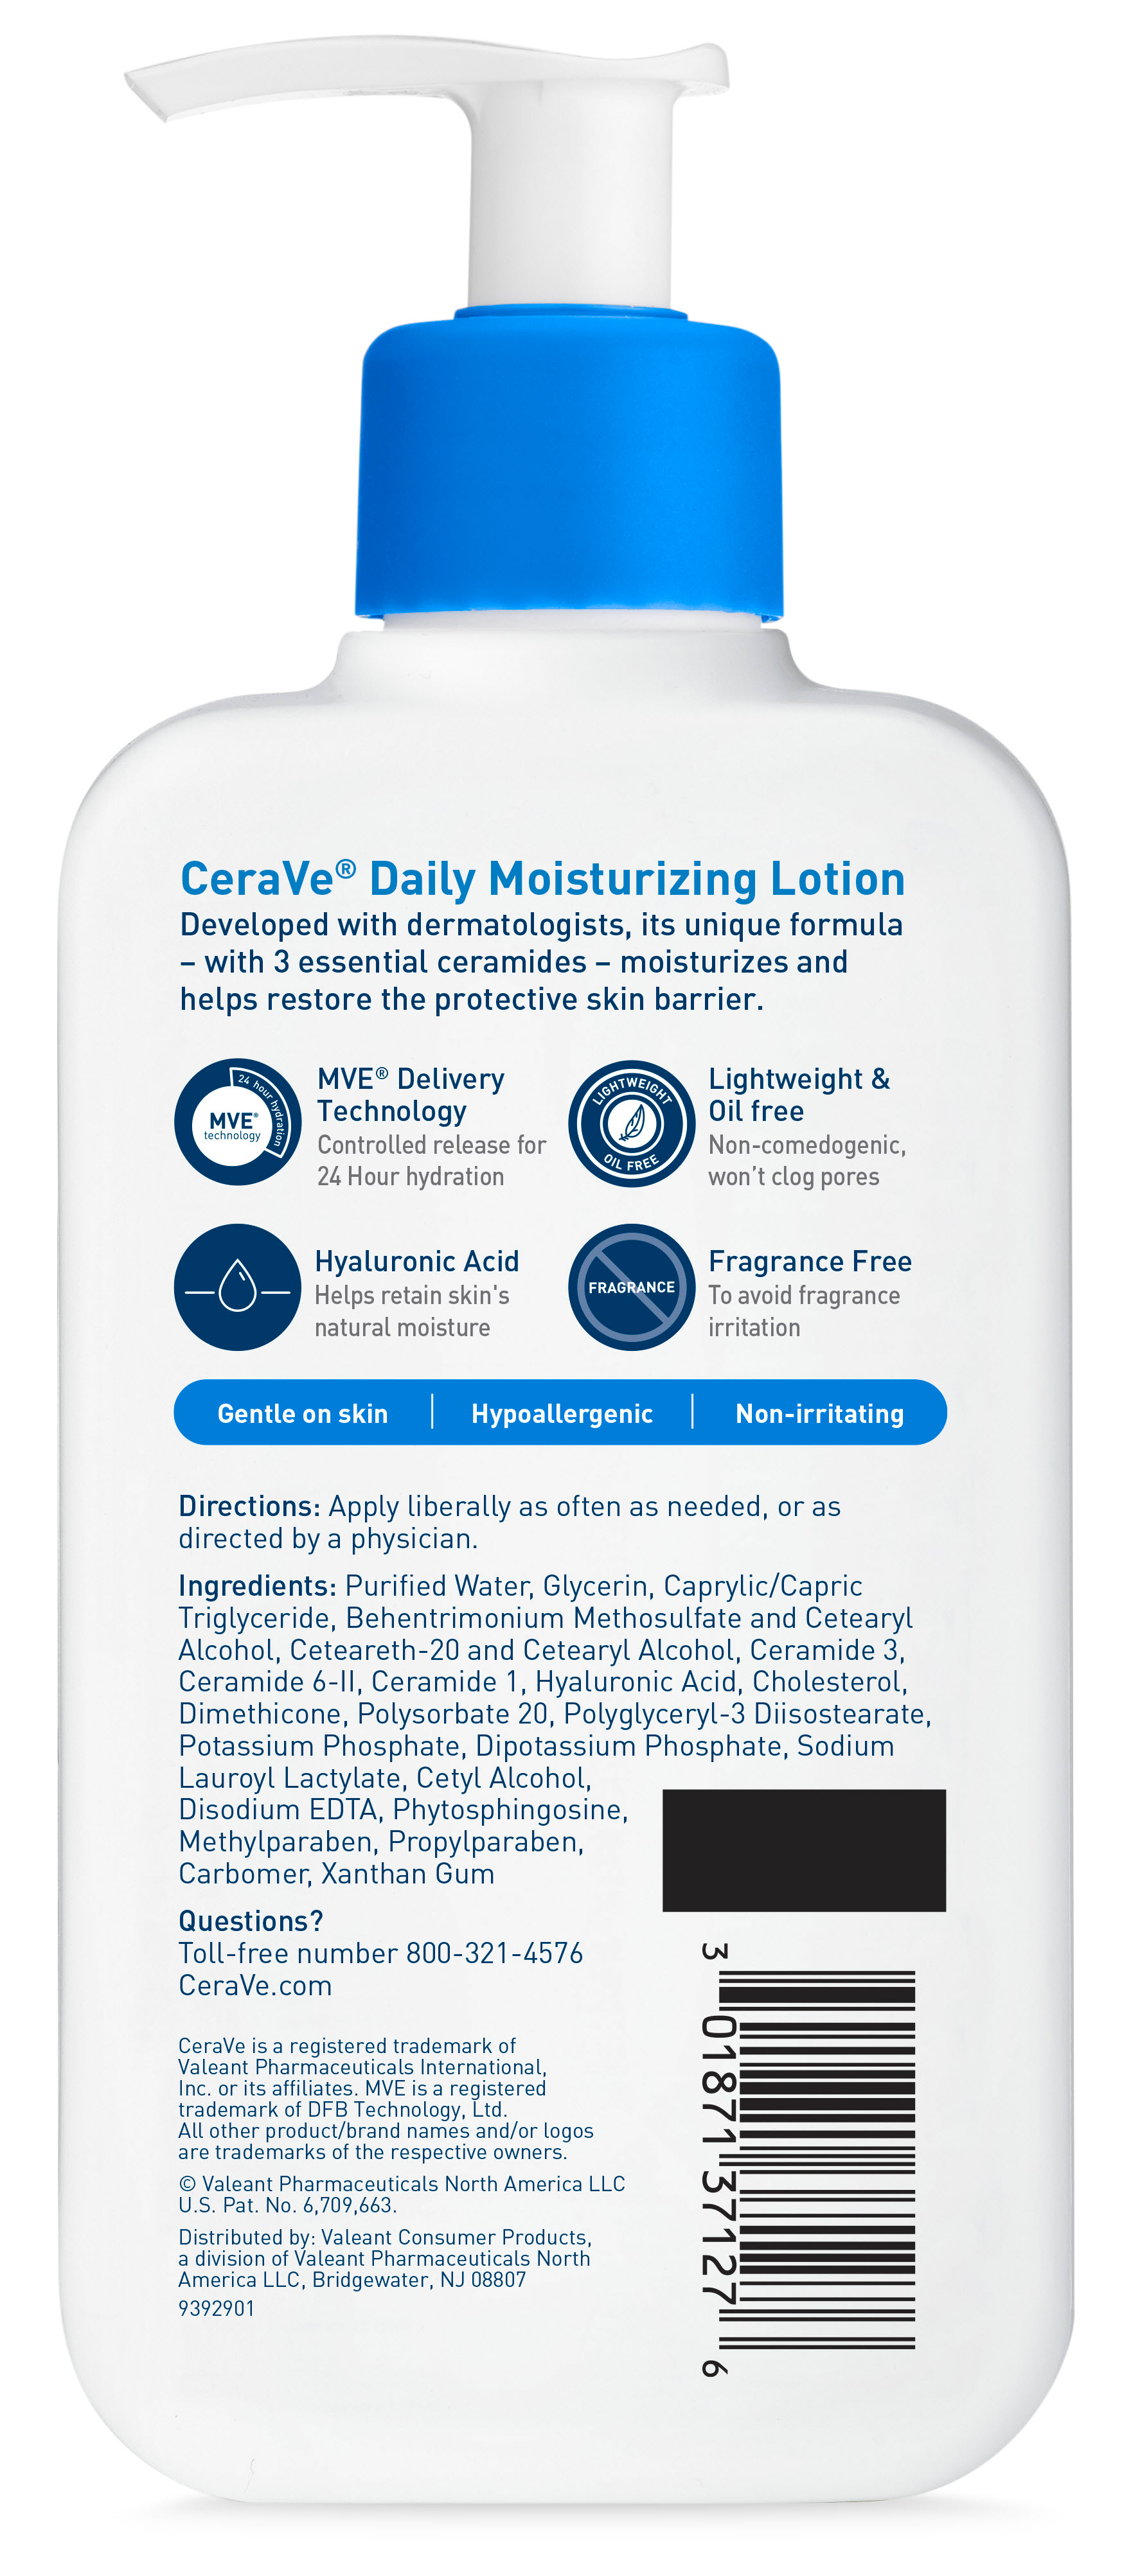 CeraVe Daily Moisturizing Lotion for Normal to Dry Skin, 8 oz. - image 5 of 12